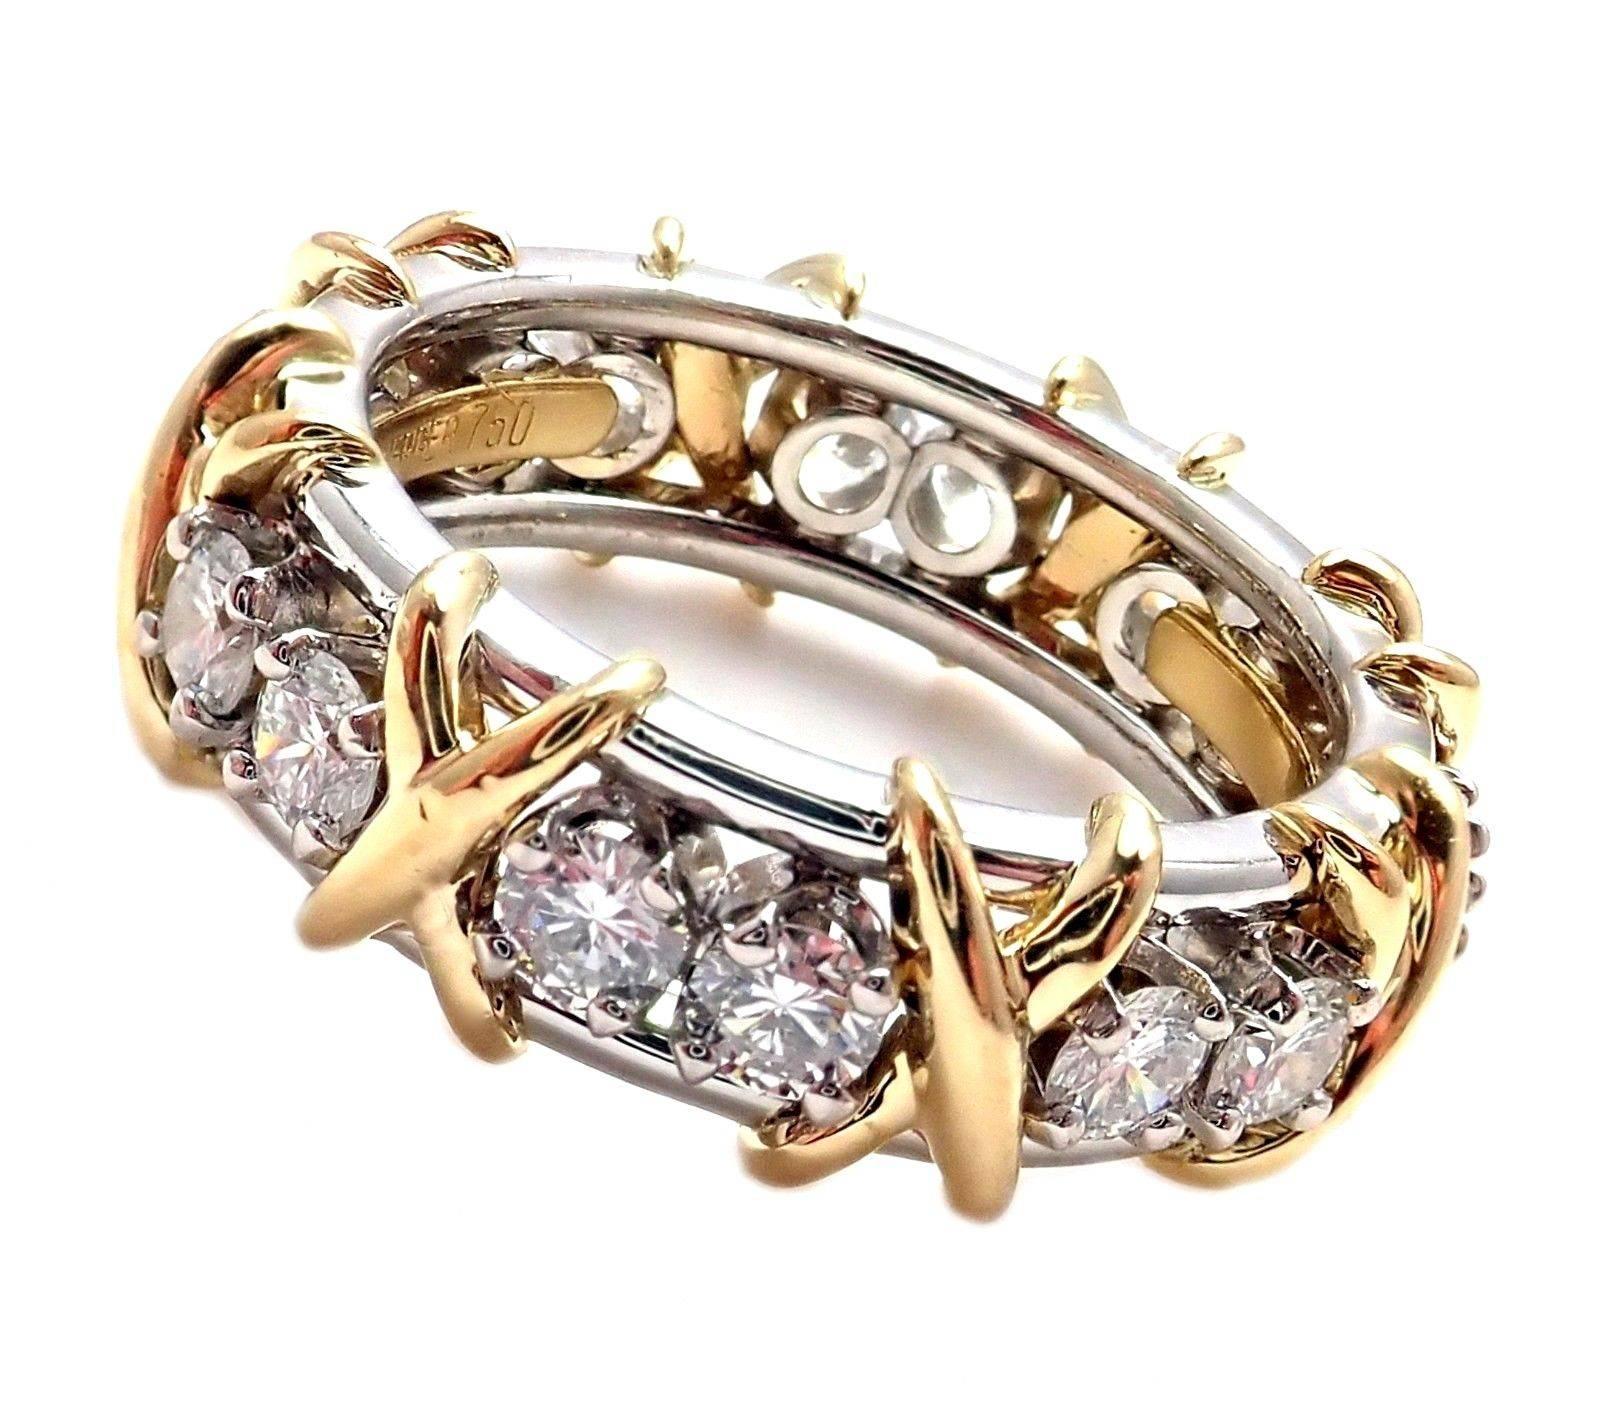 18k Yellow Gold & Platinum Diamond Jean Schlumberger Band Ring designed for Tiffany & Co. 
With 16 Round Brilliant Cut Diamonds VS1 clarity, G color, Total weight Approx 1.14ct
This ring comes with Tiffany & Co box.
Details:
Ring Size: 5.5
Weight: